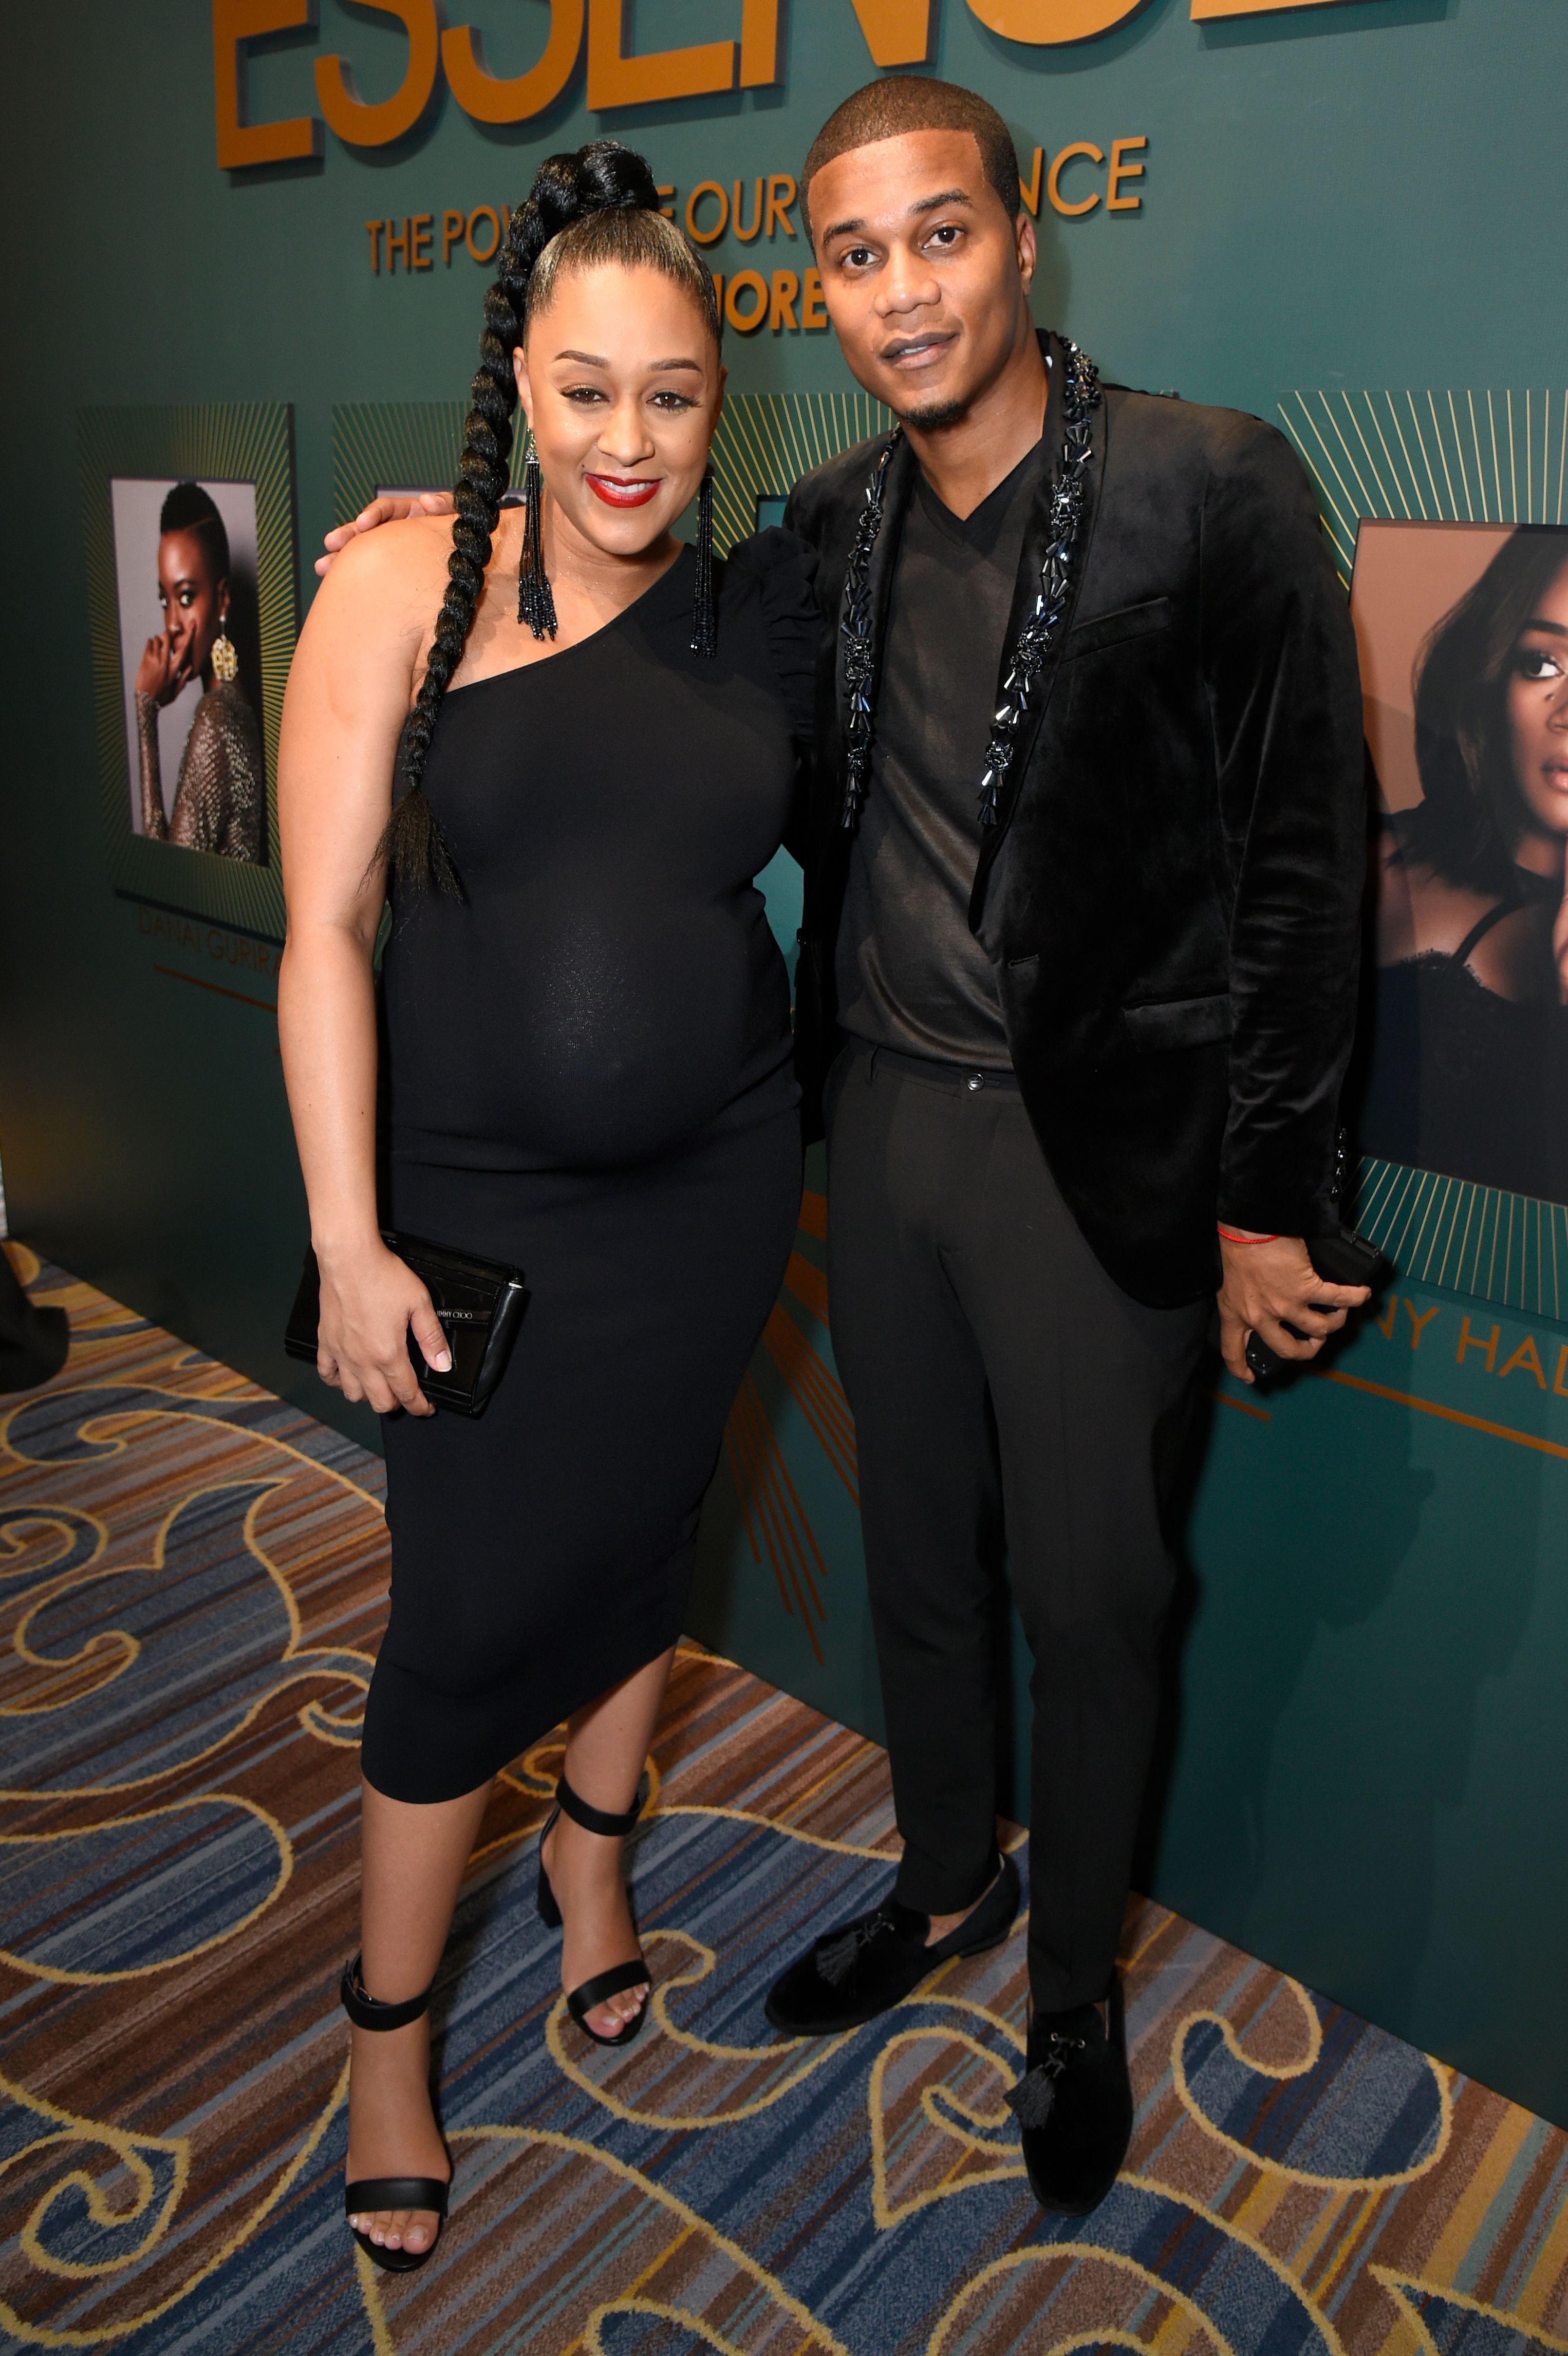 Cory Hardrict Can't Stop Feeding Wife Tia Mowry-Hardrict To Satisfy Her Pregnancy Cravings
